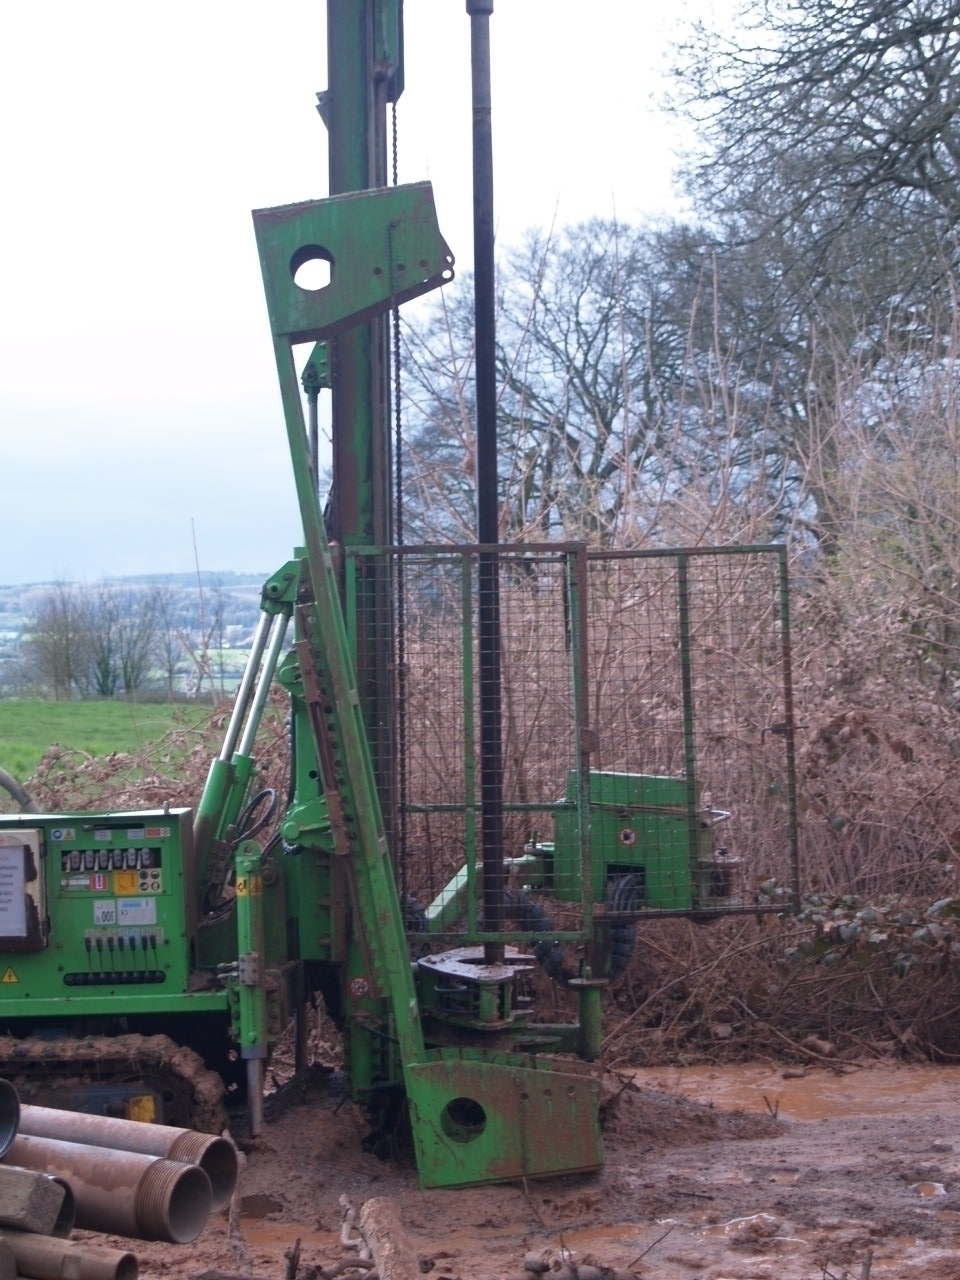 The Comacchio 450P Drill Rig is a medium sized rig designed for the geotechnical, environmental, water and exploration sectors. It's folding top mast and small footprint allows it to access tight work sites, while its 6.5 tonne main winch and 9 tonne pull back allows it to reach depths of over 1000m.